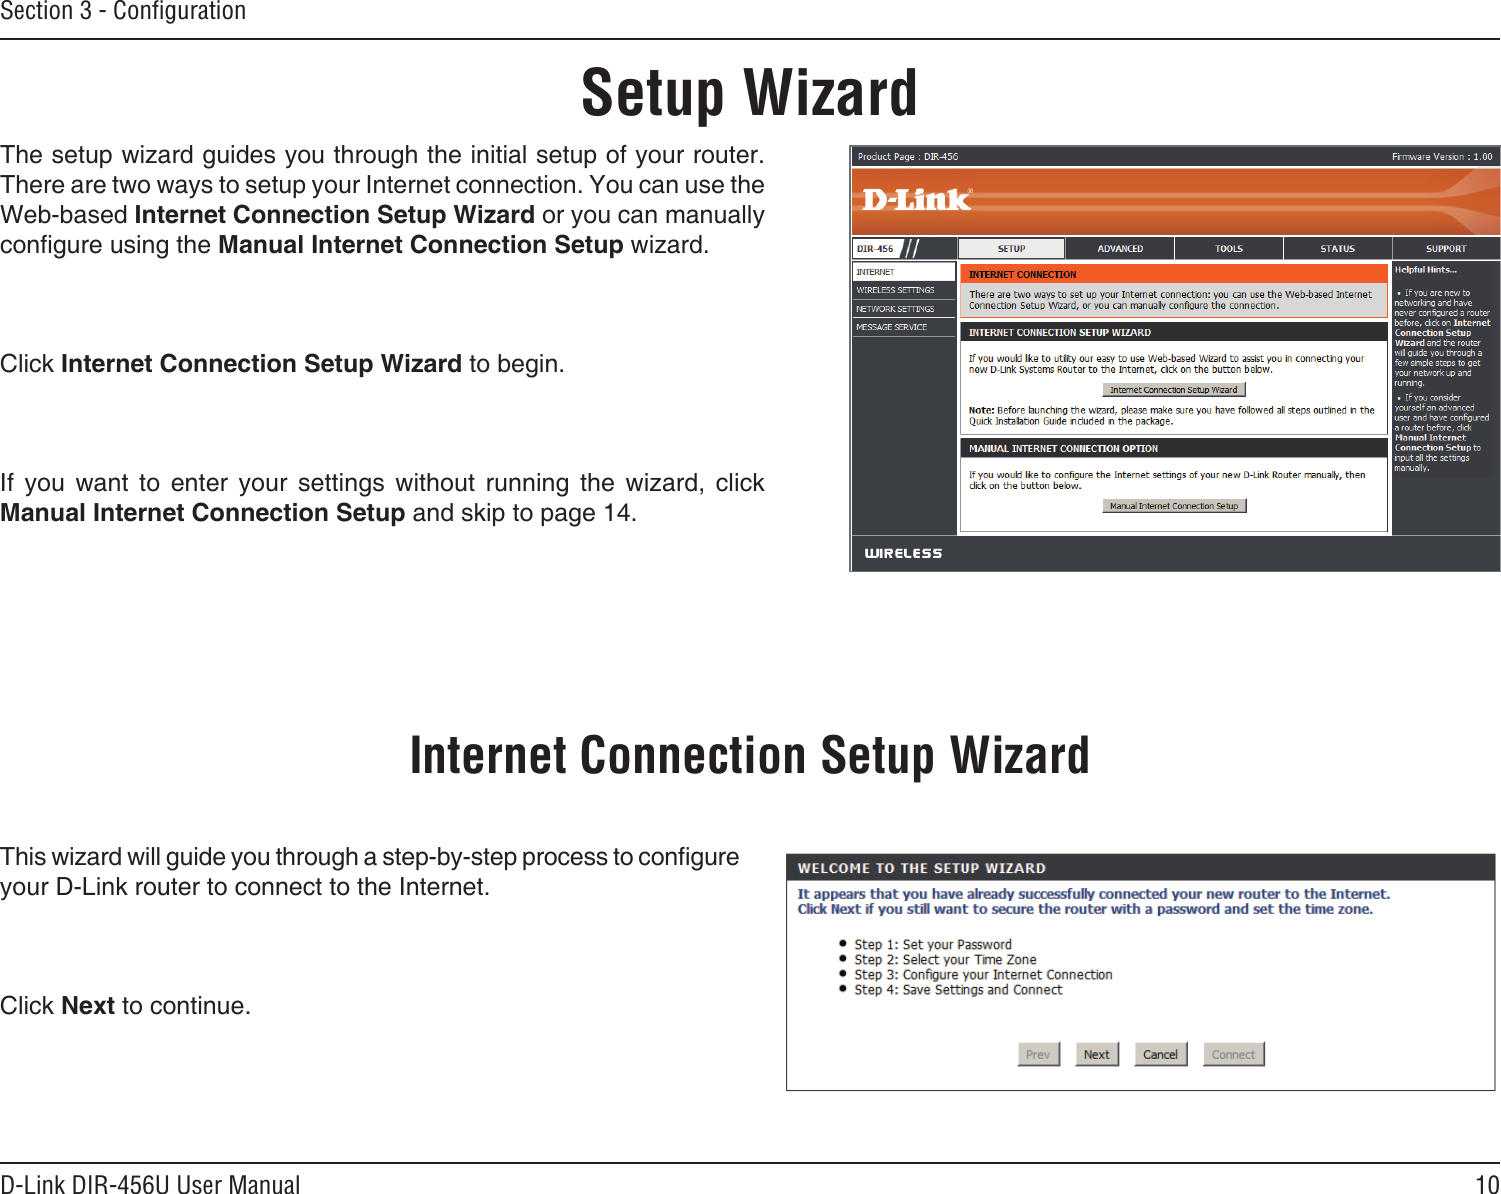 10D-Link DIR-456U User ManualSection 3 - ConﬁgurationSetup WizardThe setup wizard guides you through the initial setup of your router. There are two ways to setup your Internet connection. You can use the Web-based Internet Connection Setup Wizard or you can manually congure using the Manual Internet Connection Setup wizard.Click Internet Connection Setup Wizard to begin.If  you  want  to  enter  your  settings  without  running  the  wizard,  click Manual Internet Connection Setup and skip to page 14.This wizard will guide you through a step-by-step process to congure your D-Link router to connect to the Internet.Click Next to continue.Internet Connection Setup Wizard